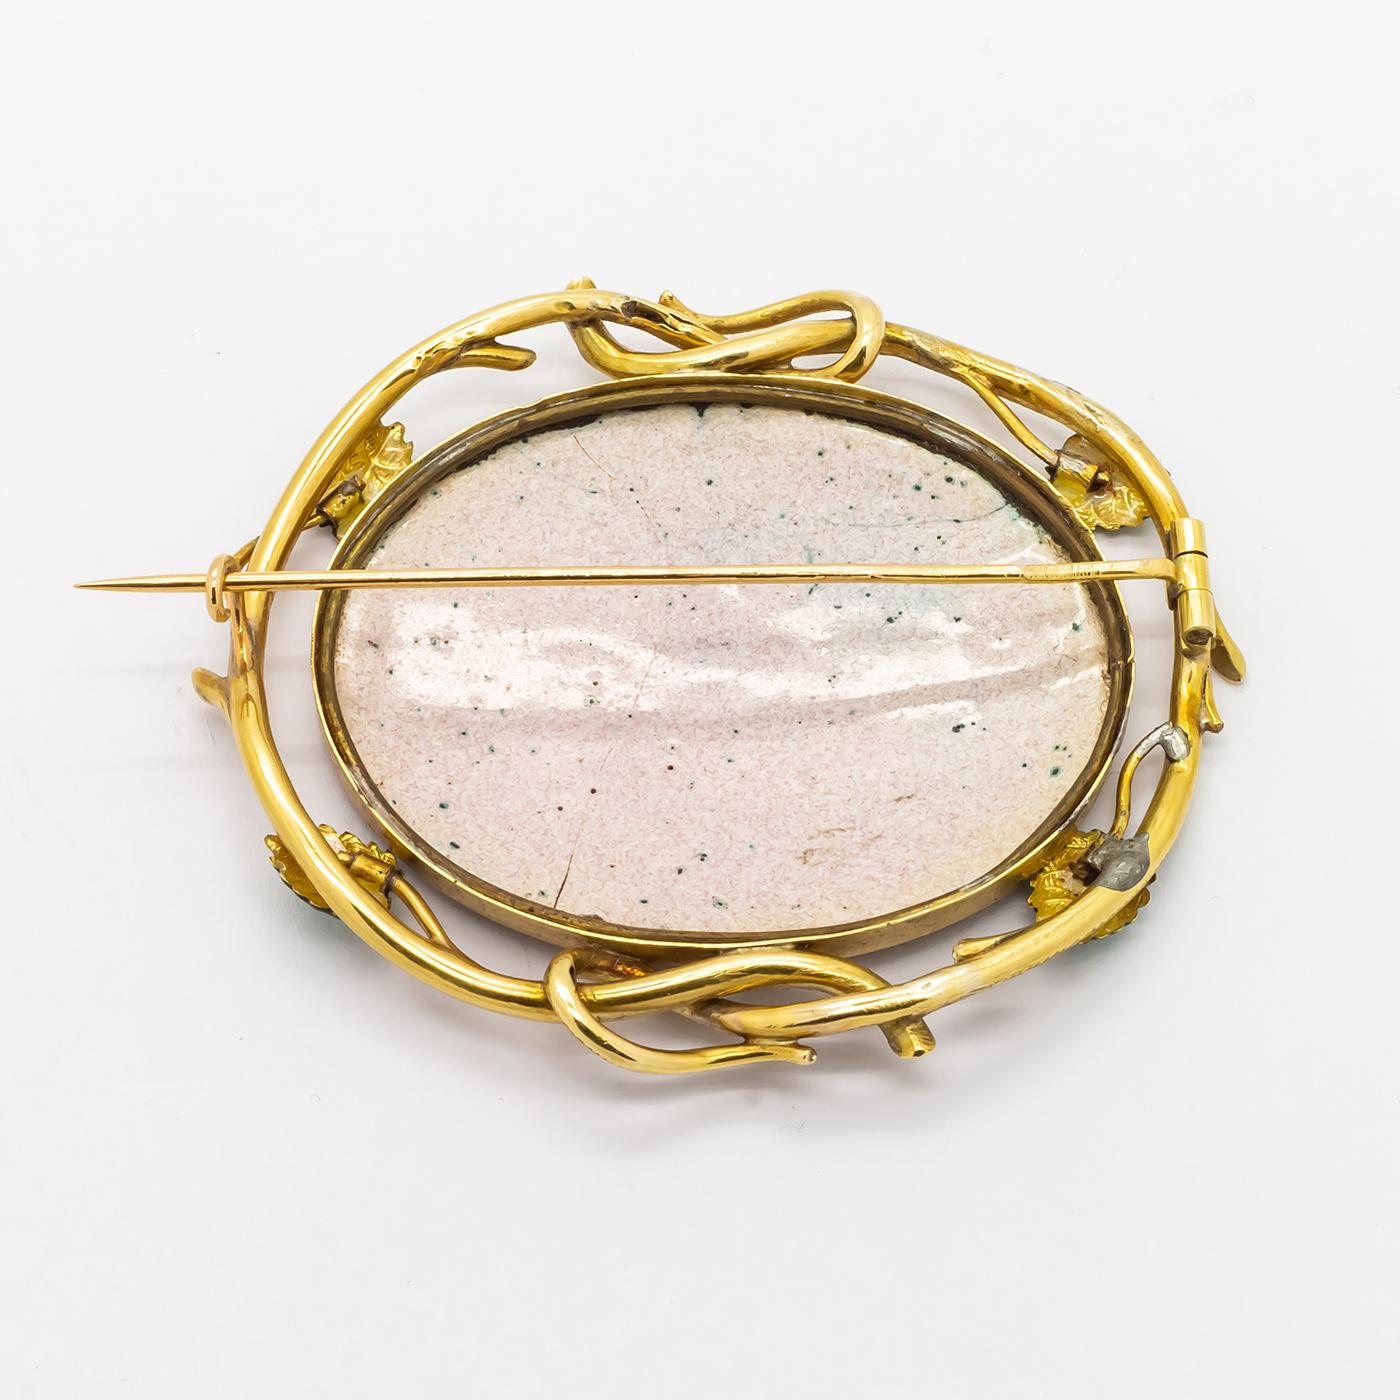 Antique Swiss Enamel And Gold Brooch, Circa 1870 For Sale 1